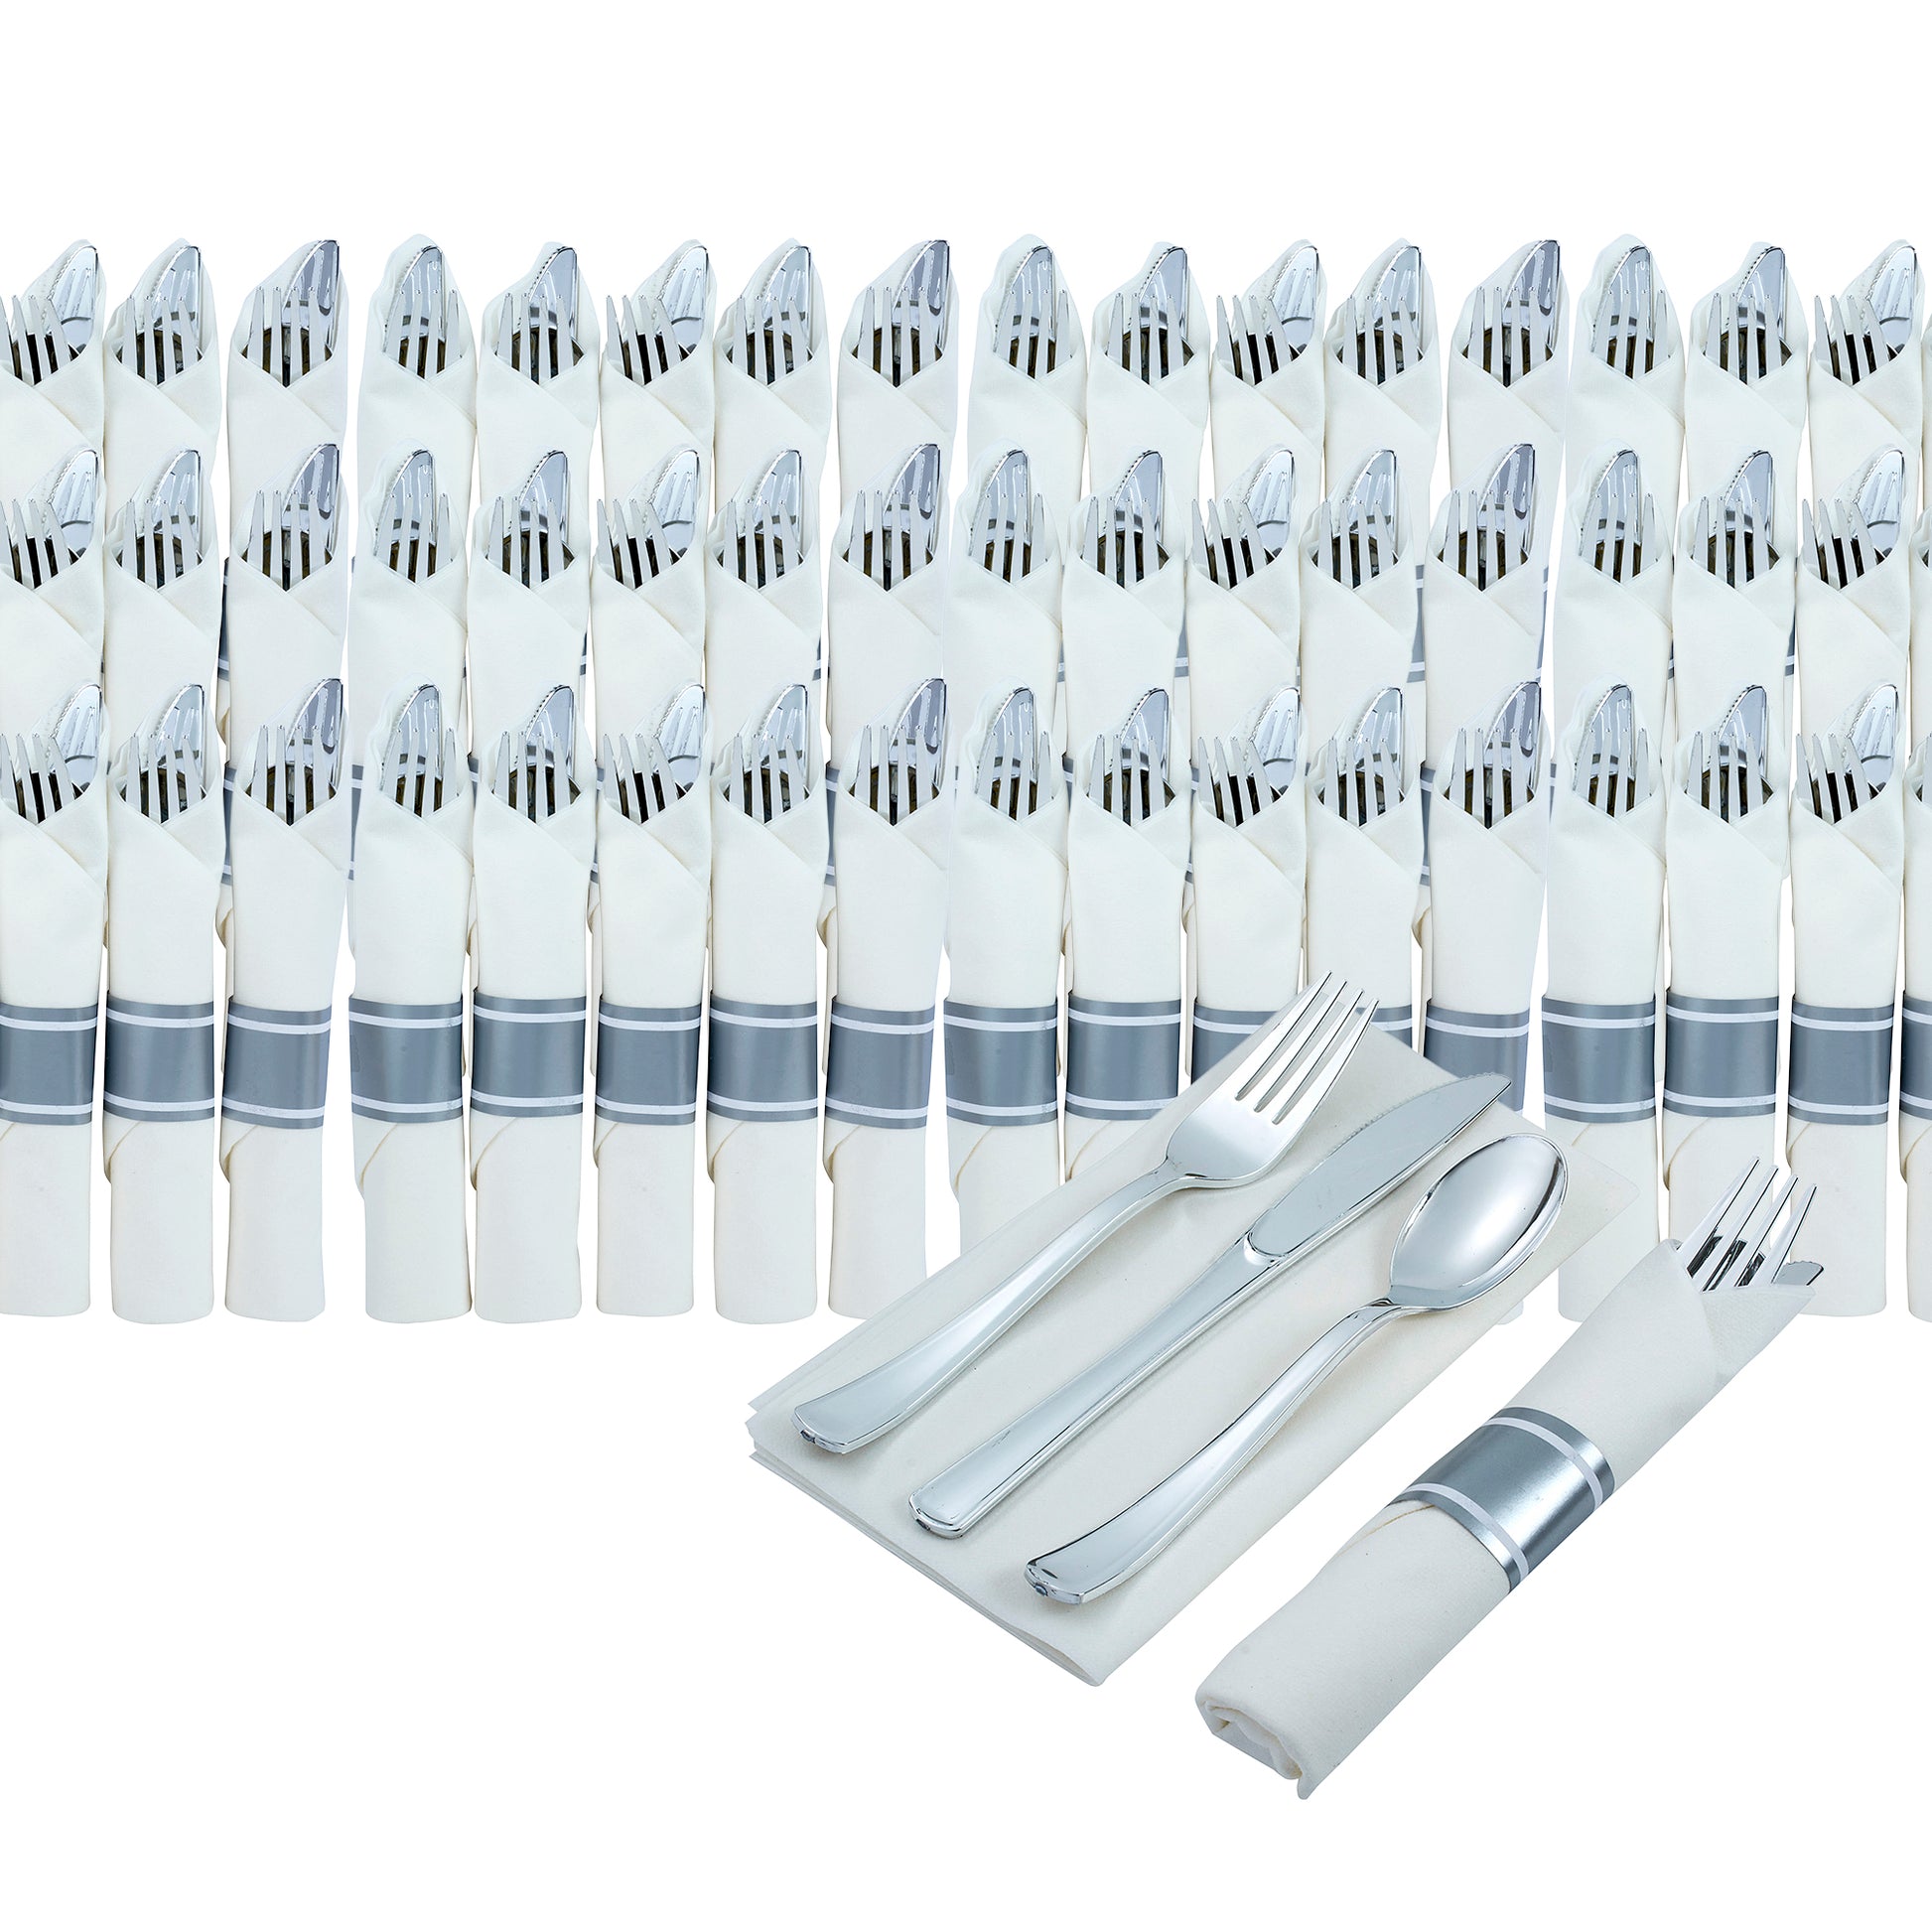 Pre Rolled Plastic Silverware Sets for Parties (25 Pack) Silver Cutlery  Set, Disposable Spoons, Forks, Knives, Napkins Prewrapped, Heavy Duty  Utensils Individually Wrapped for Wedding, Thanksgiving